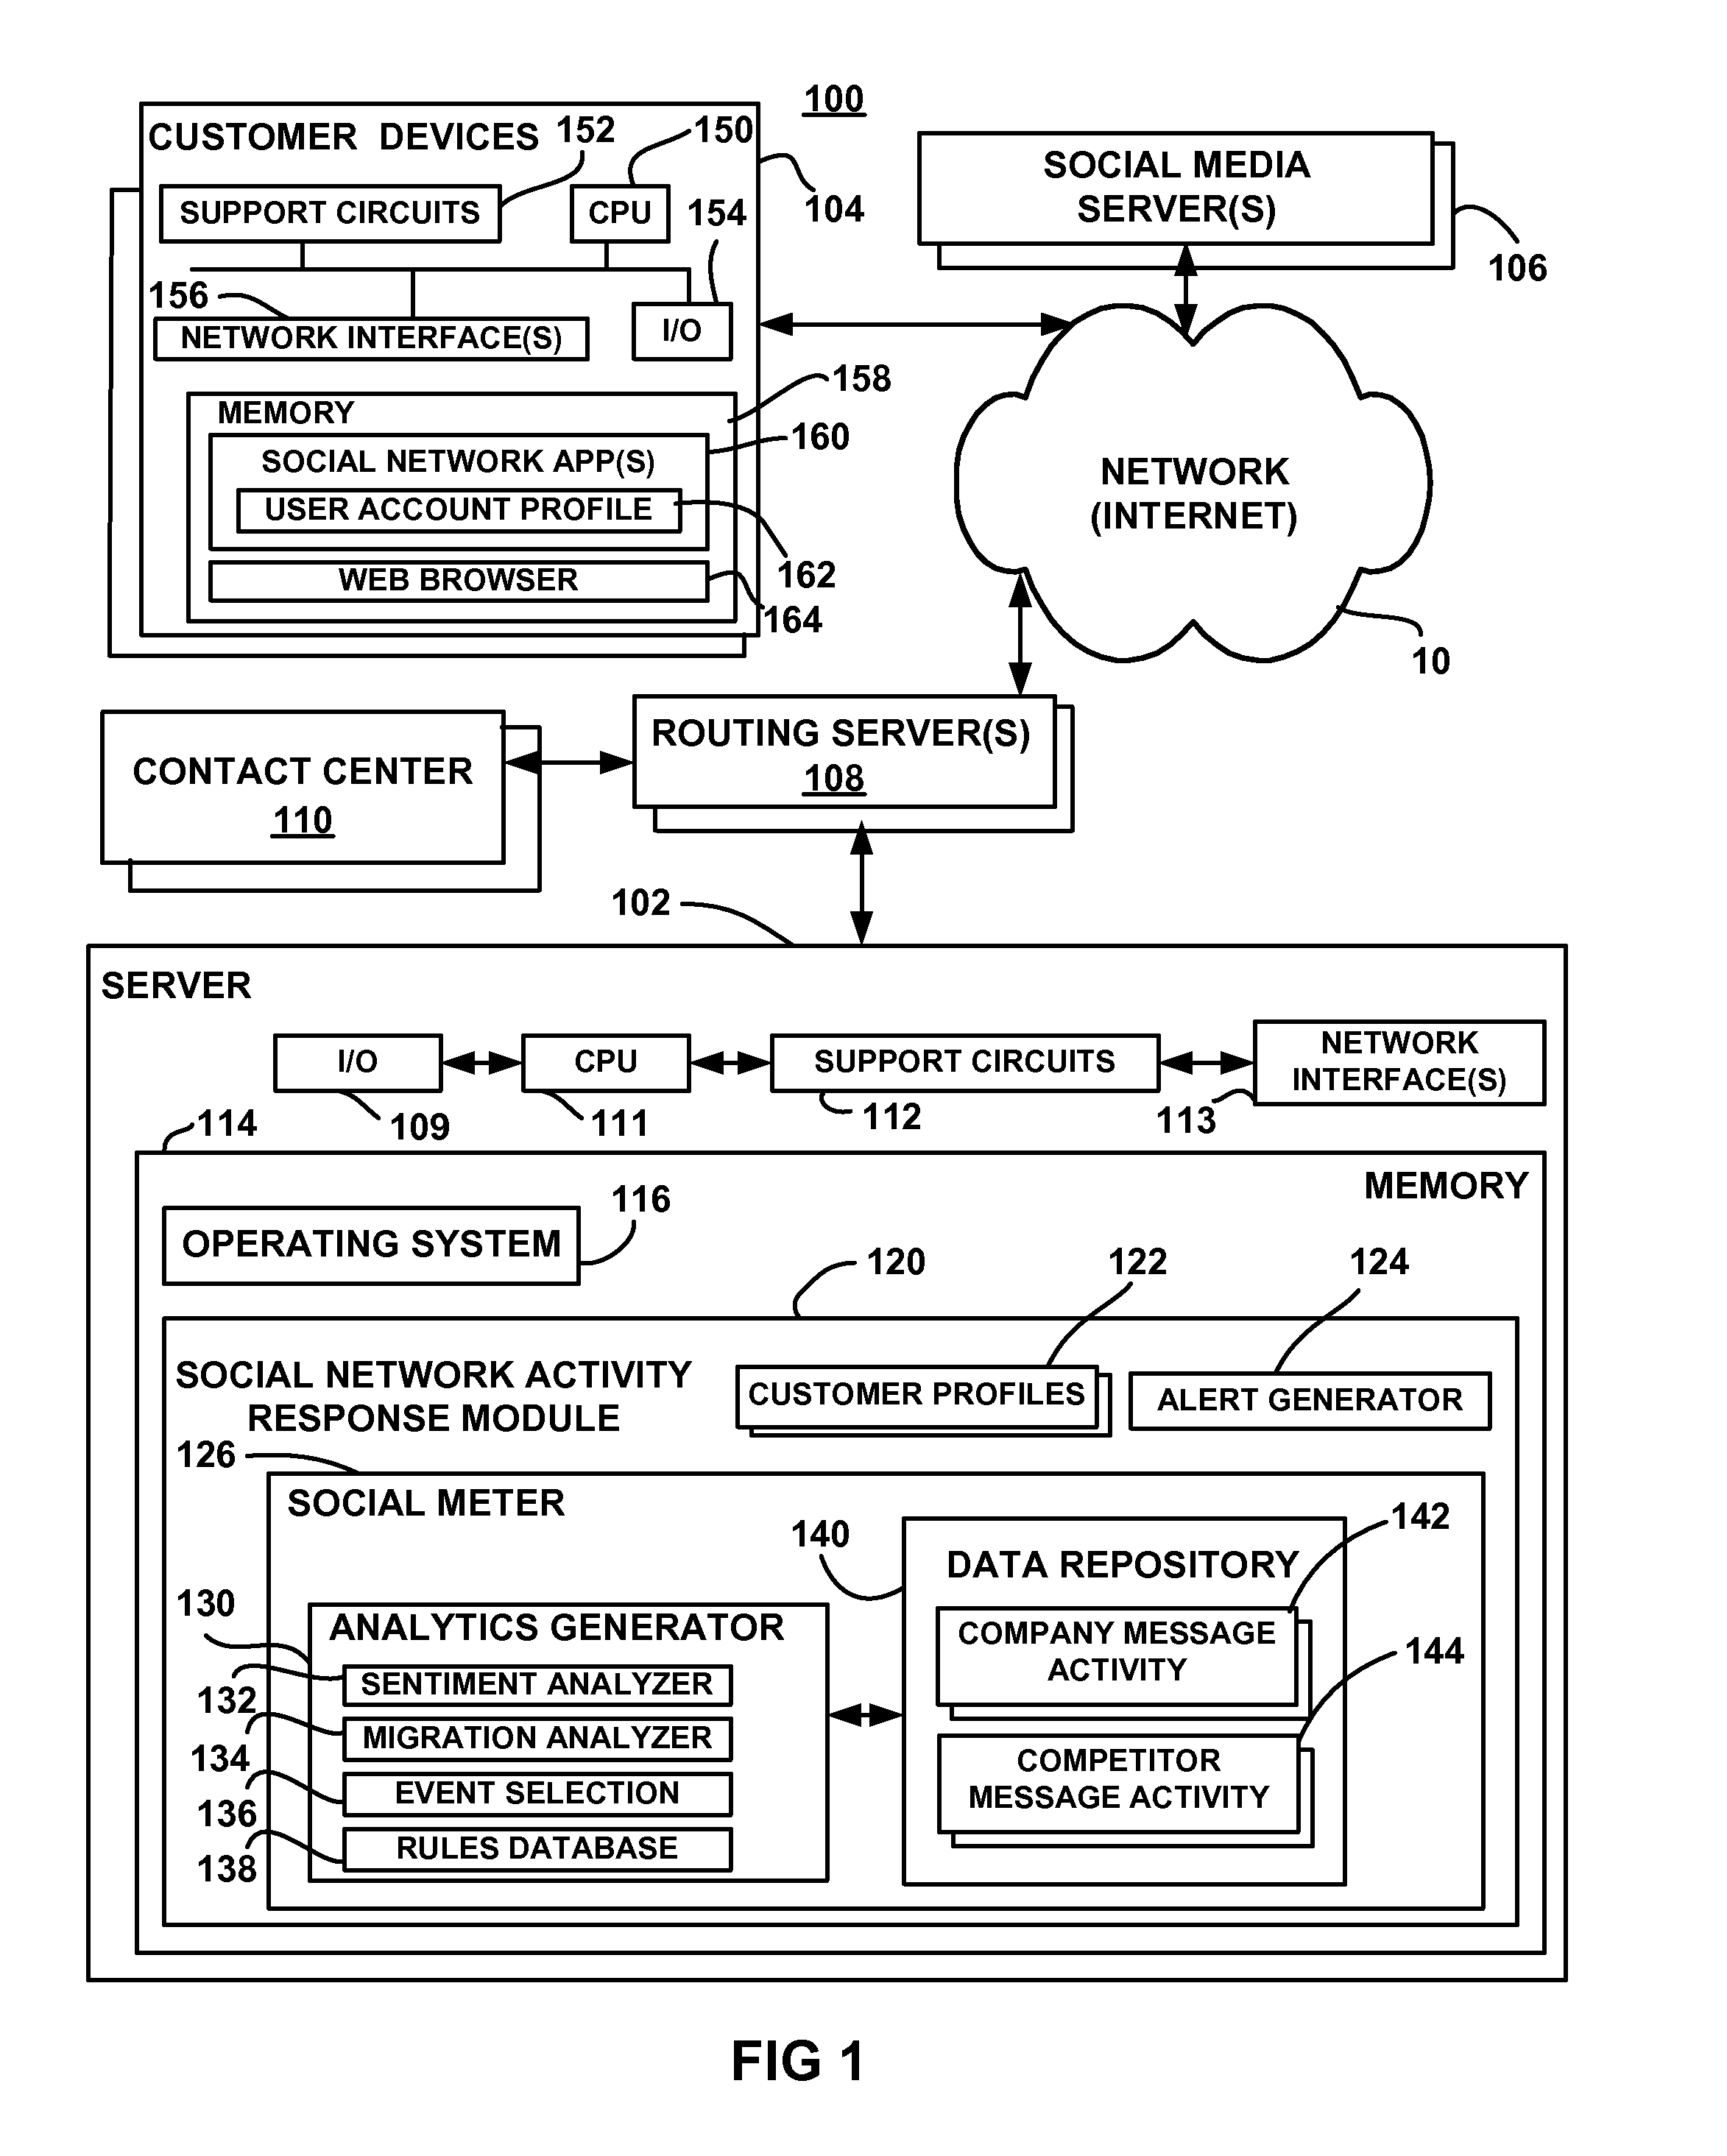 Systems and methods for influencing customer treatment in a contact center through detection and analysis of social media activity